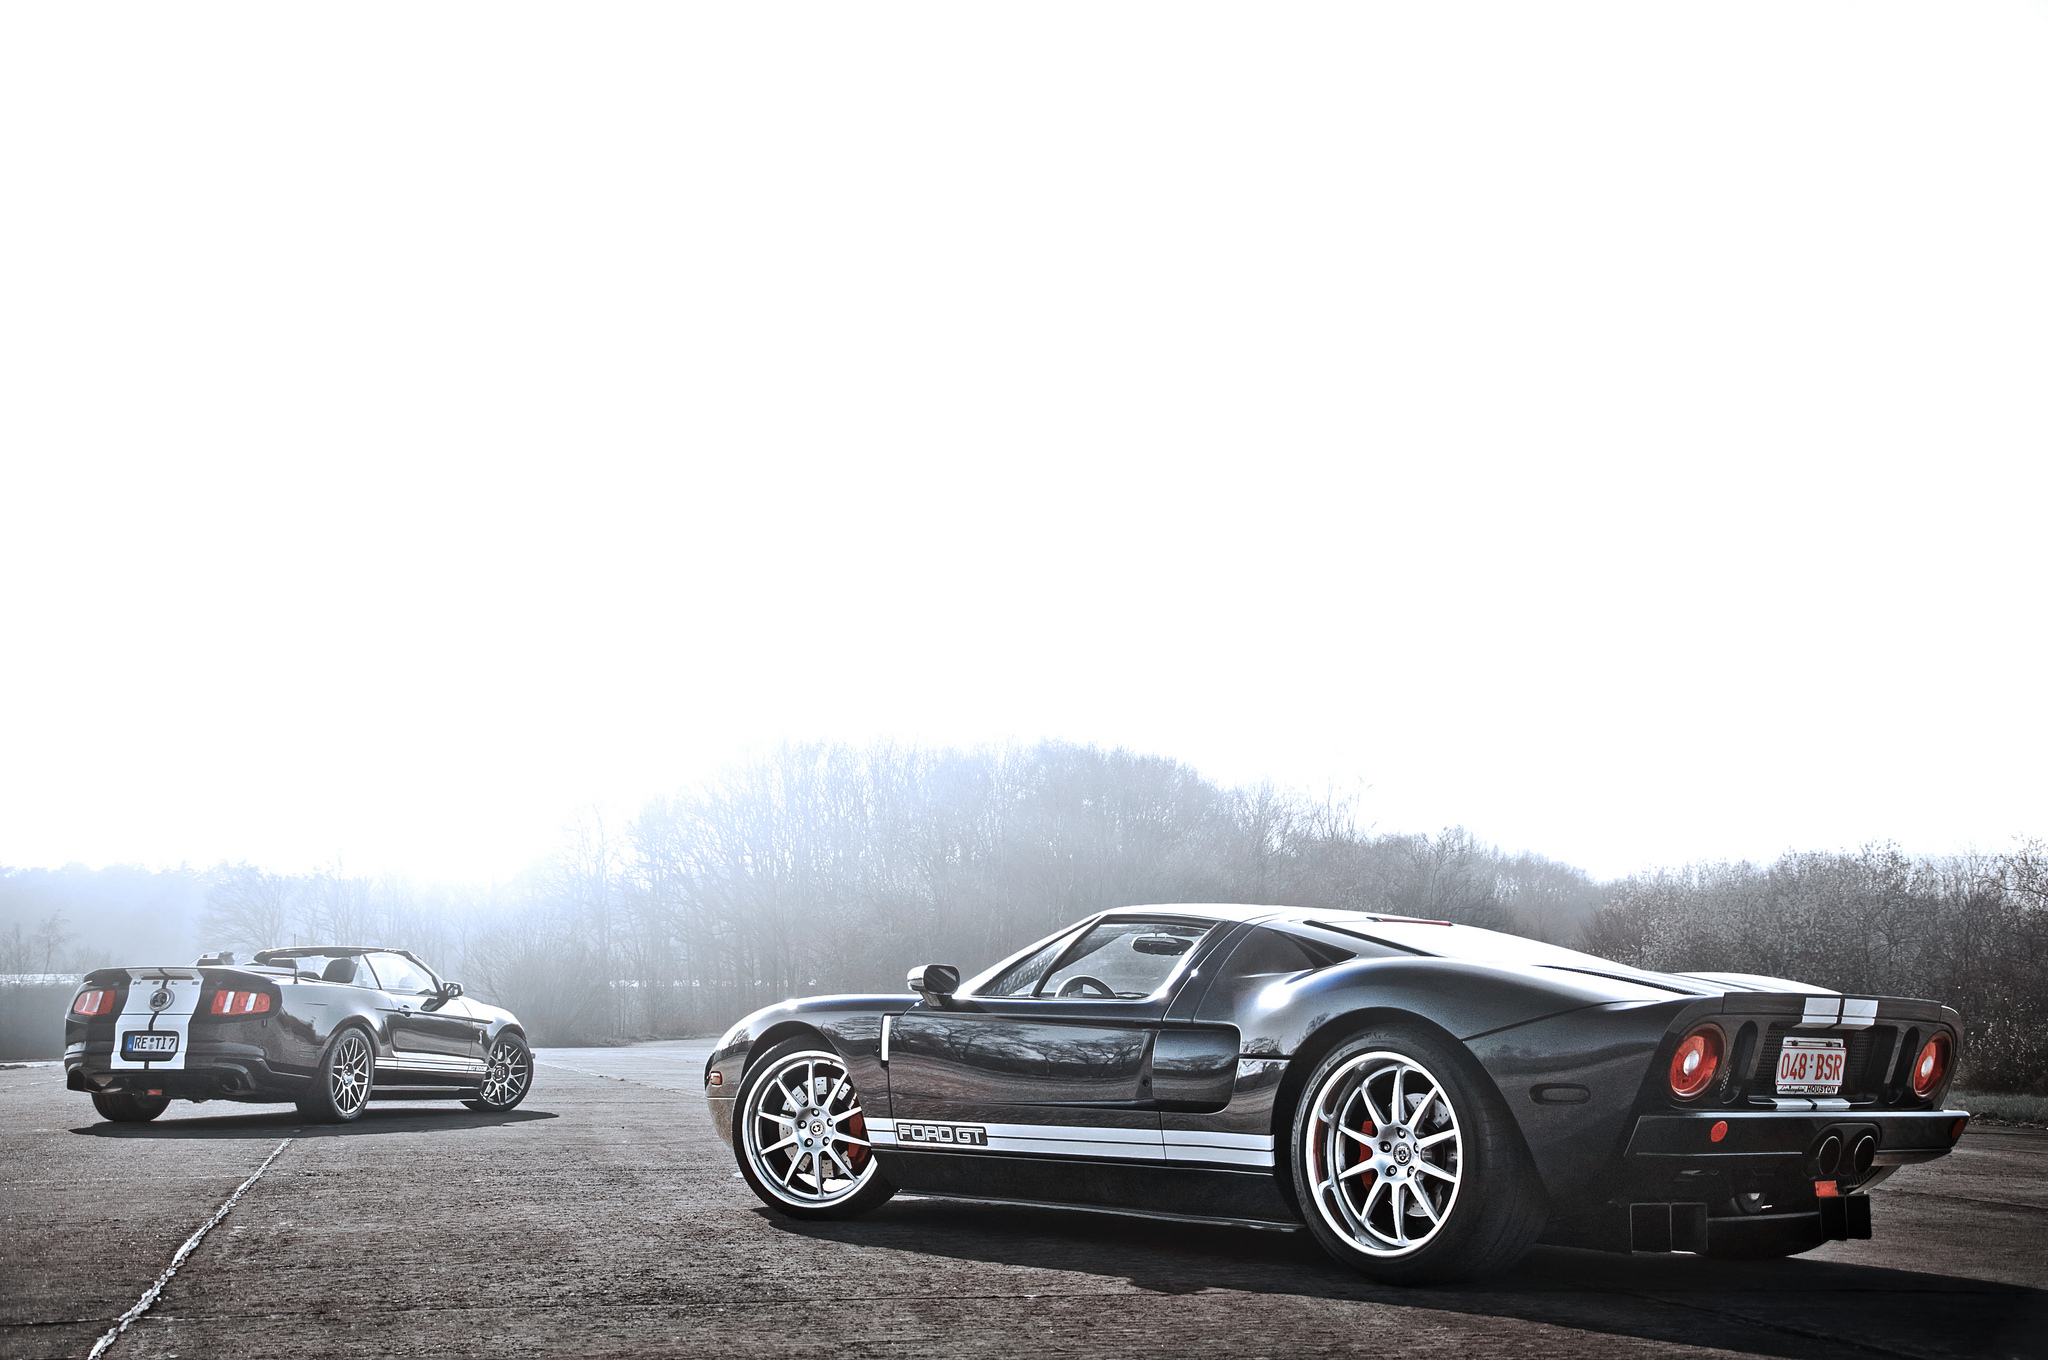 ford, Gt, Mustang, Shelby, Gt500, Convertible, Silvery, Muscle, Car, Highlight, Supercar Wallpaper